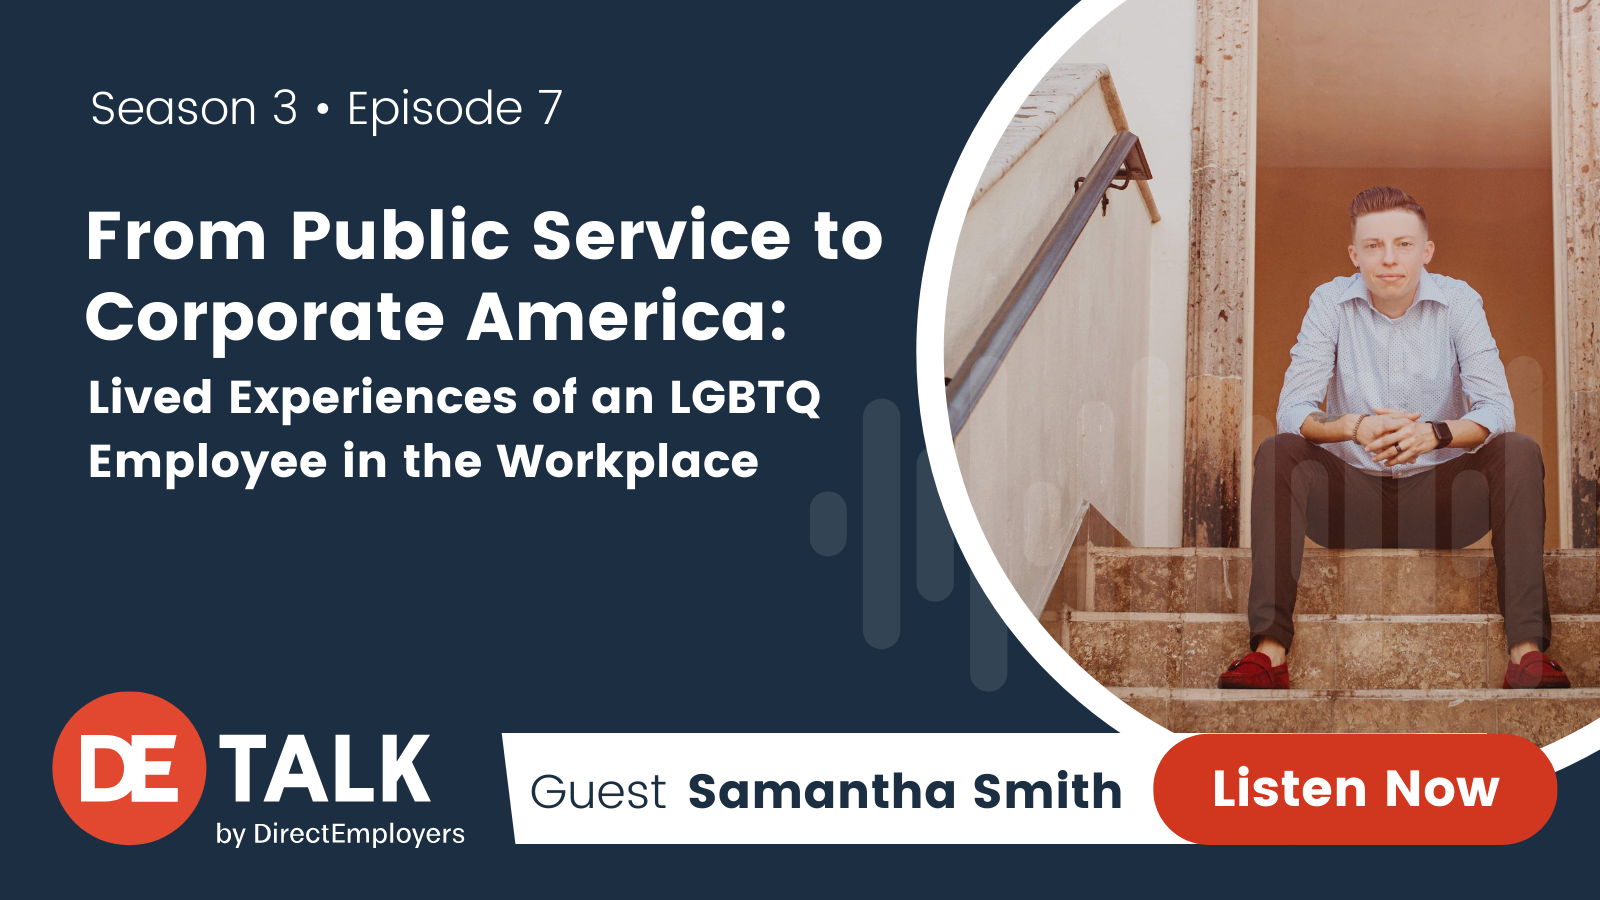 DE Talk, Season 3, Episode 7: From Public Service to Corporate America: Lived Experiences of an LGBTQ Employee in the Workplace